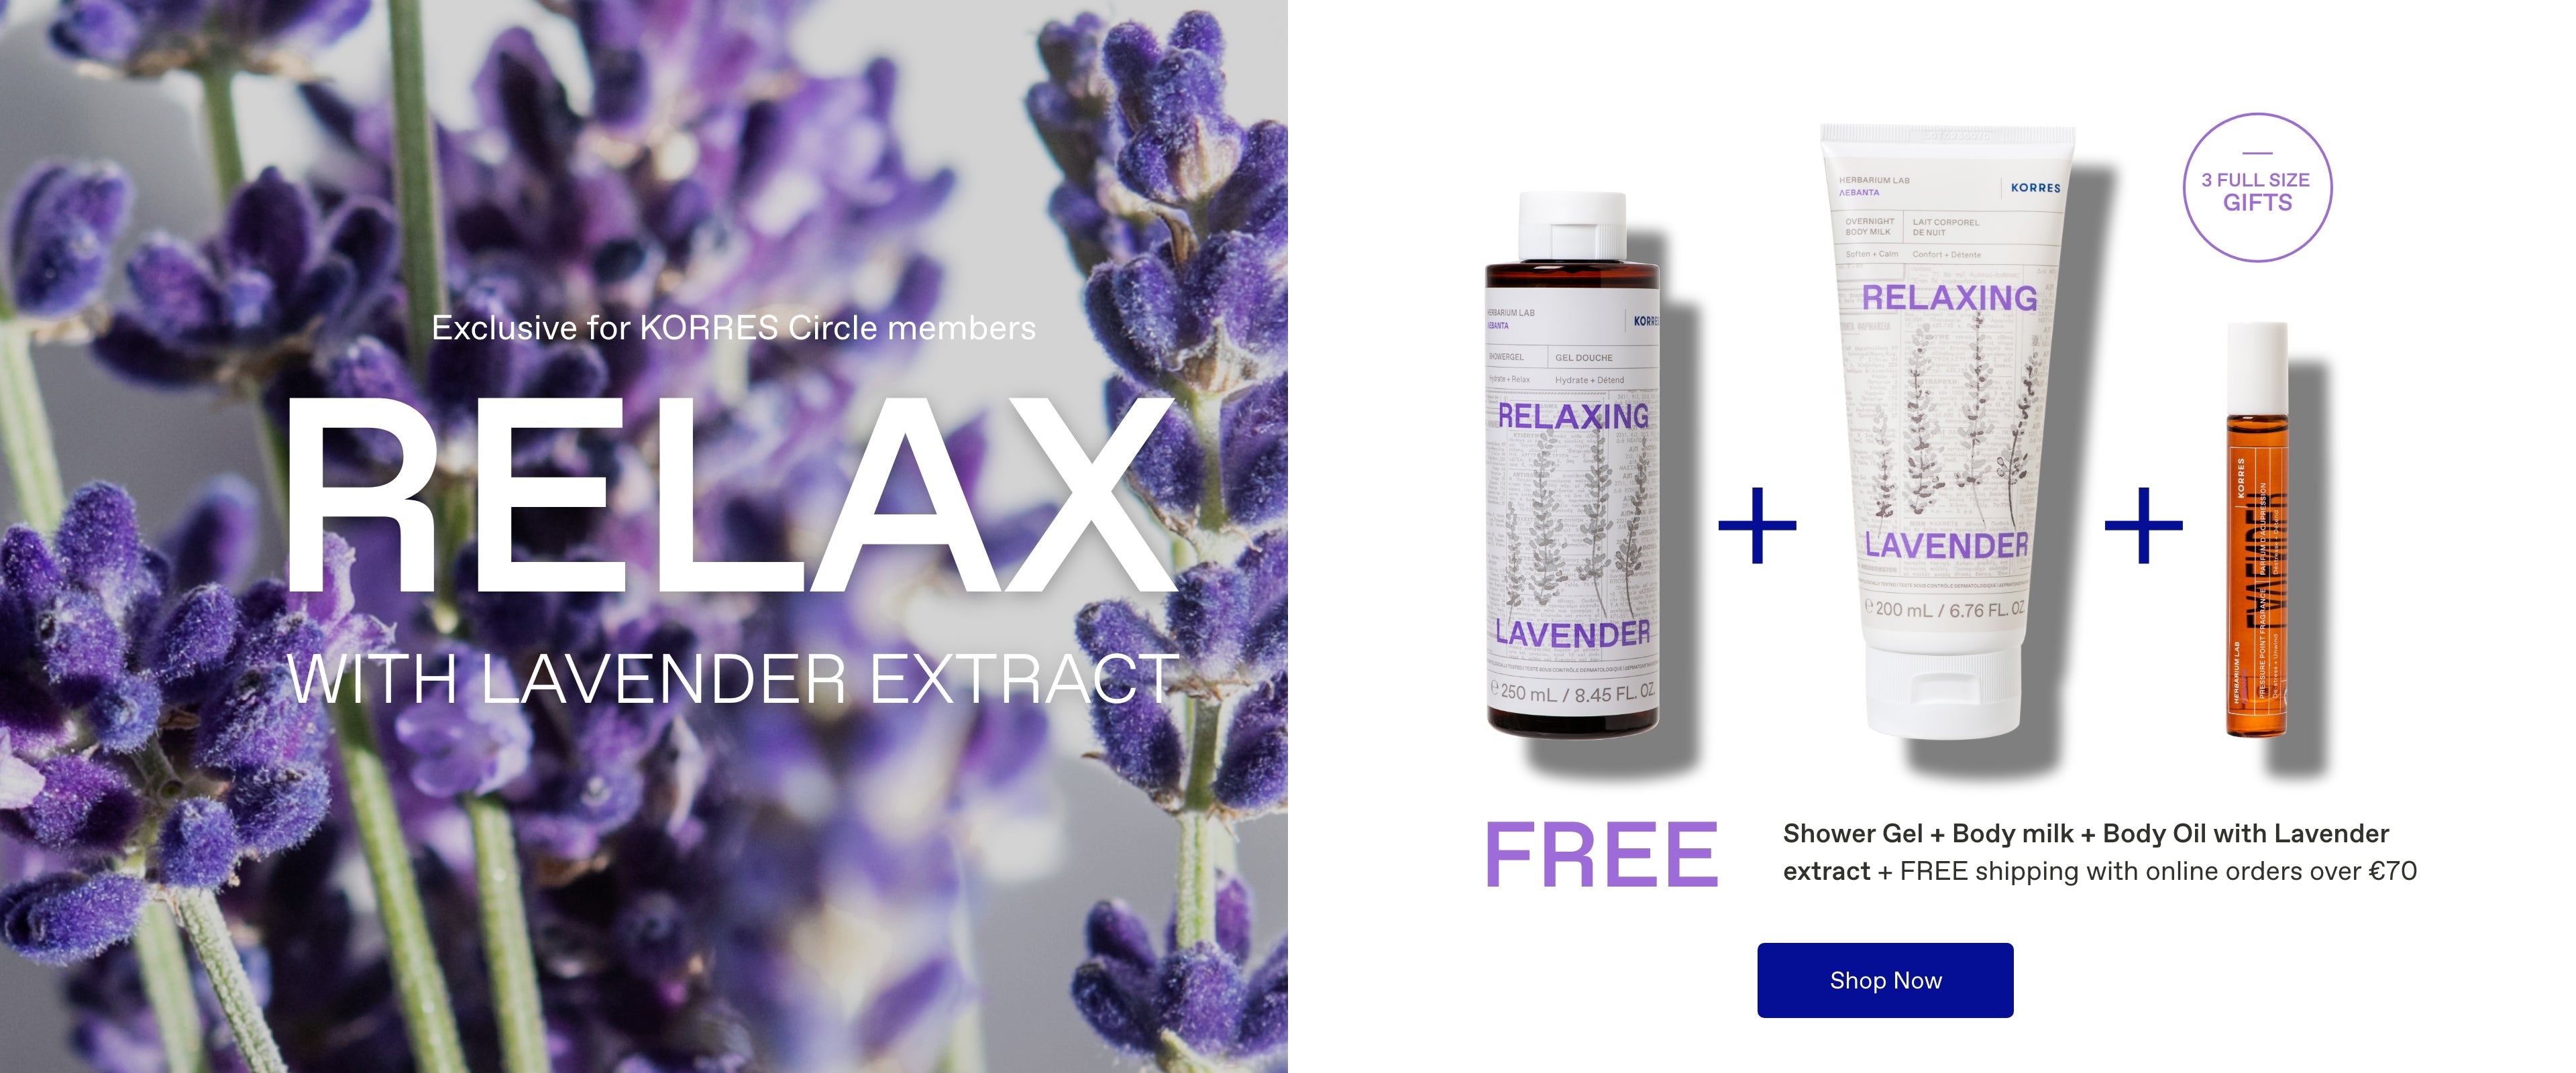 Relax with Lavender Gift